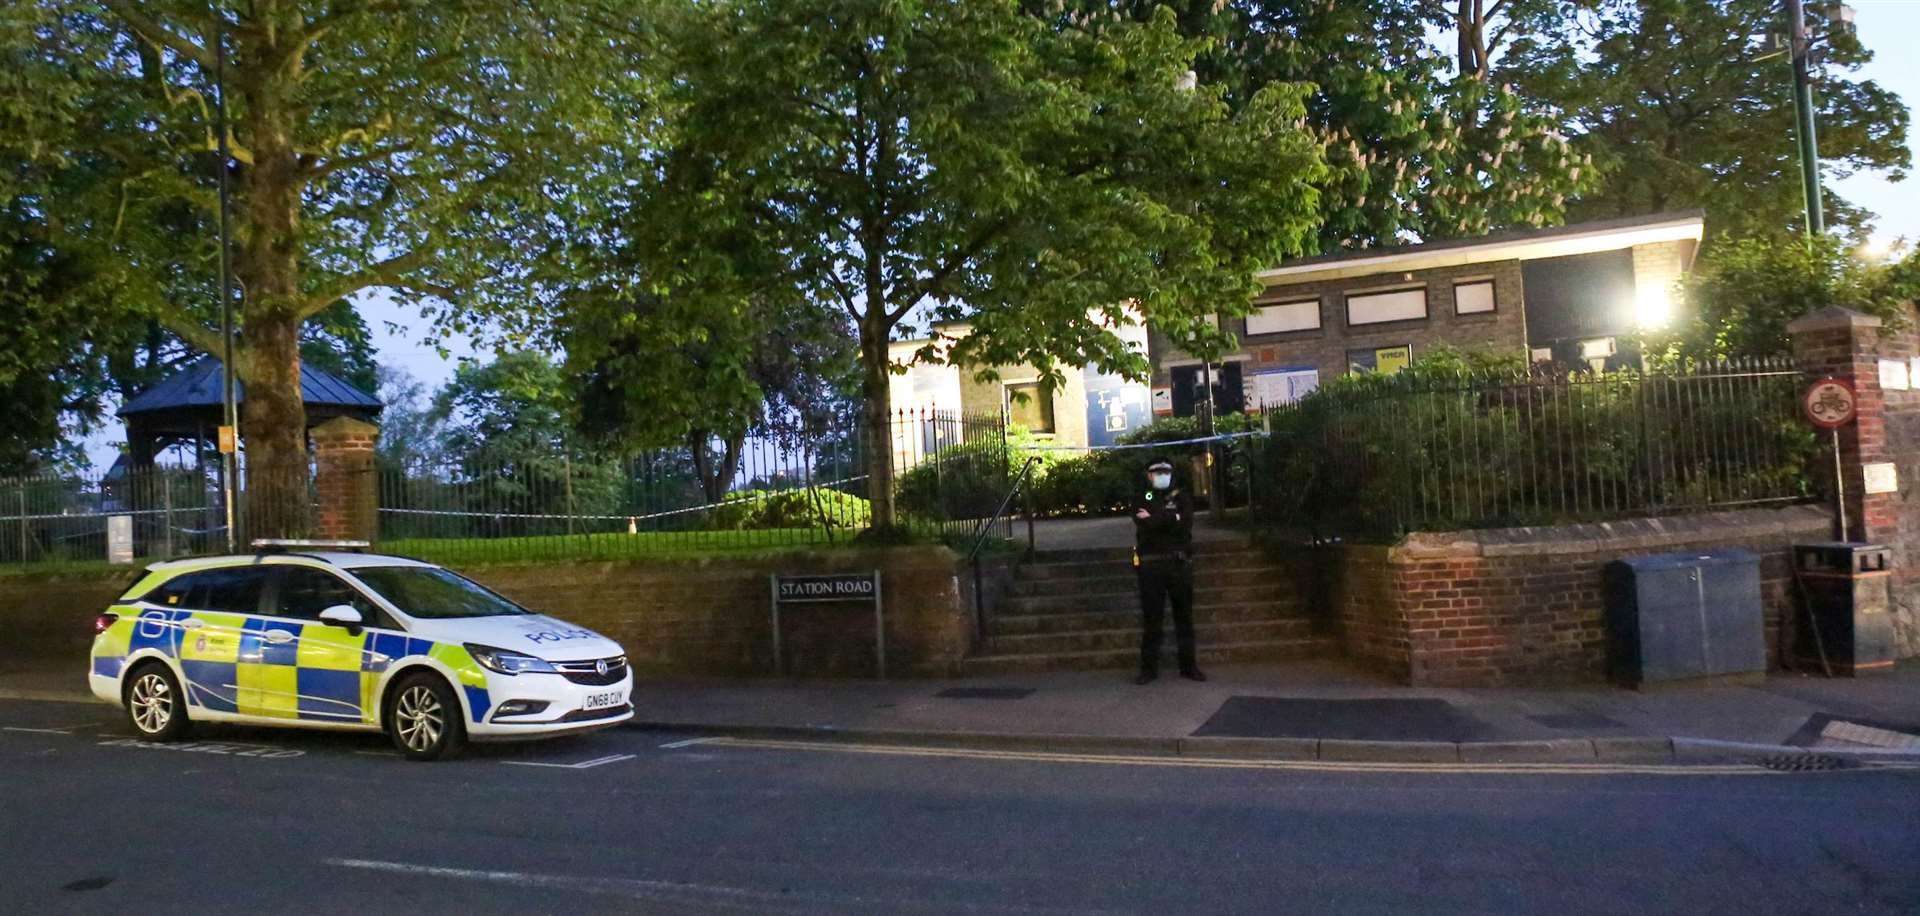 The police are called to Brenchley Gardens all too often